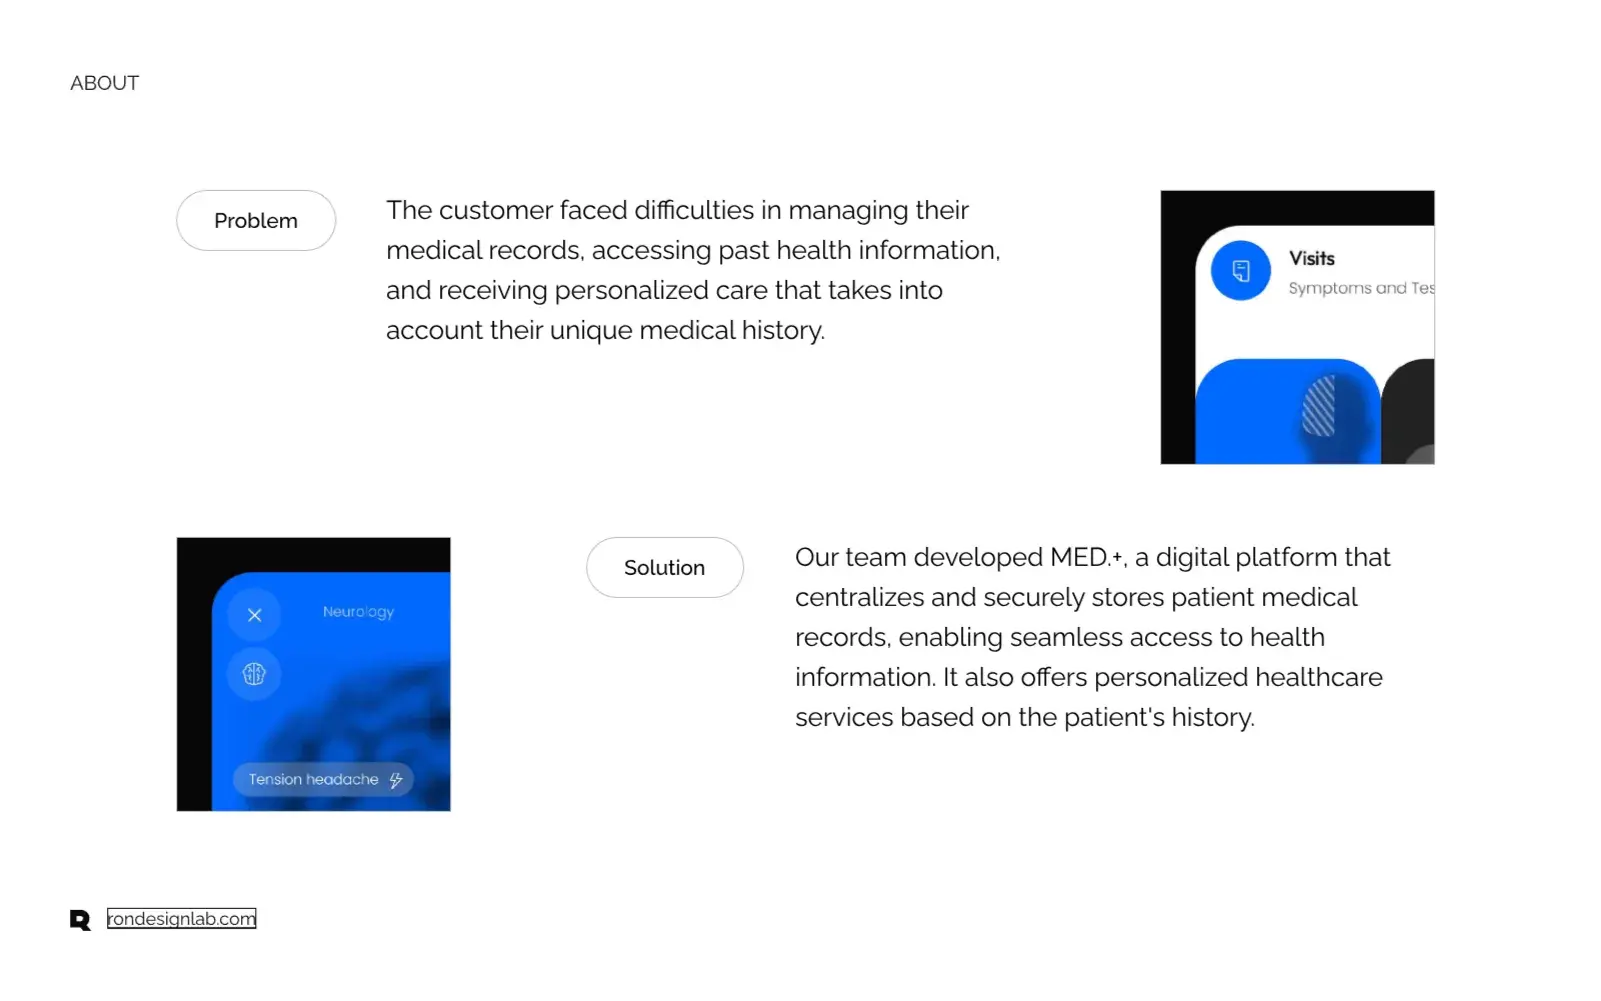 MED.+ - Personalized Healthcare at Your Fingertips - Business